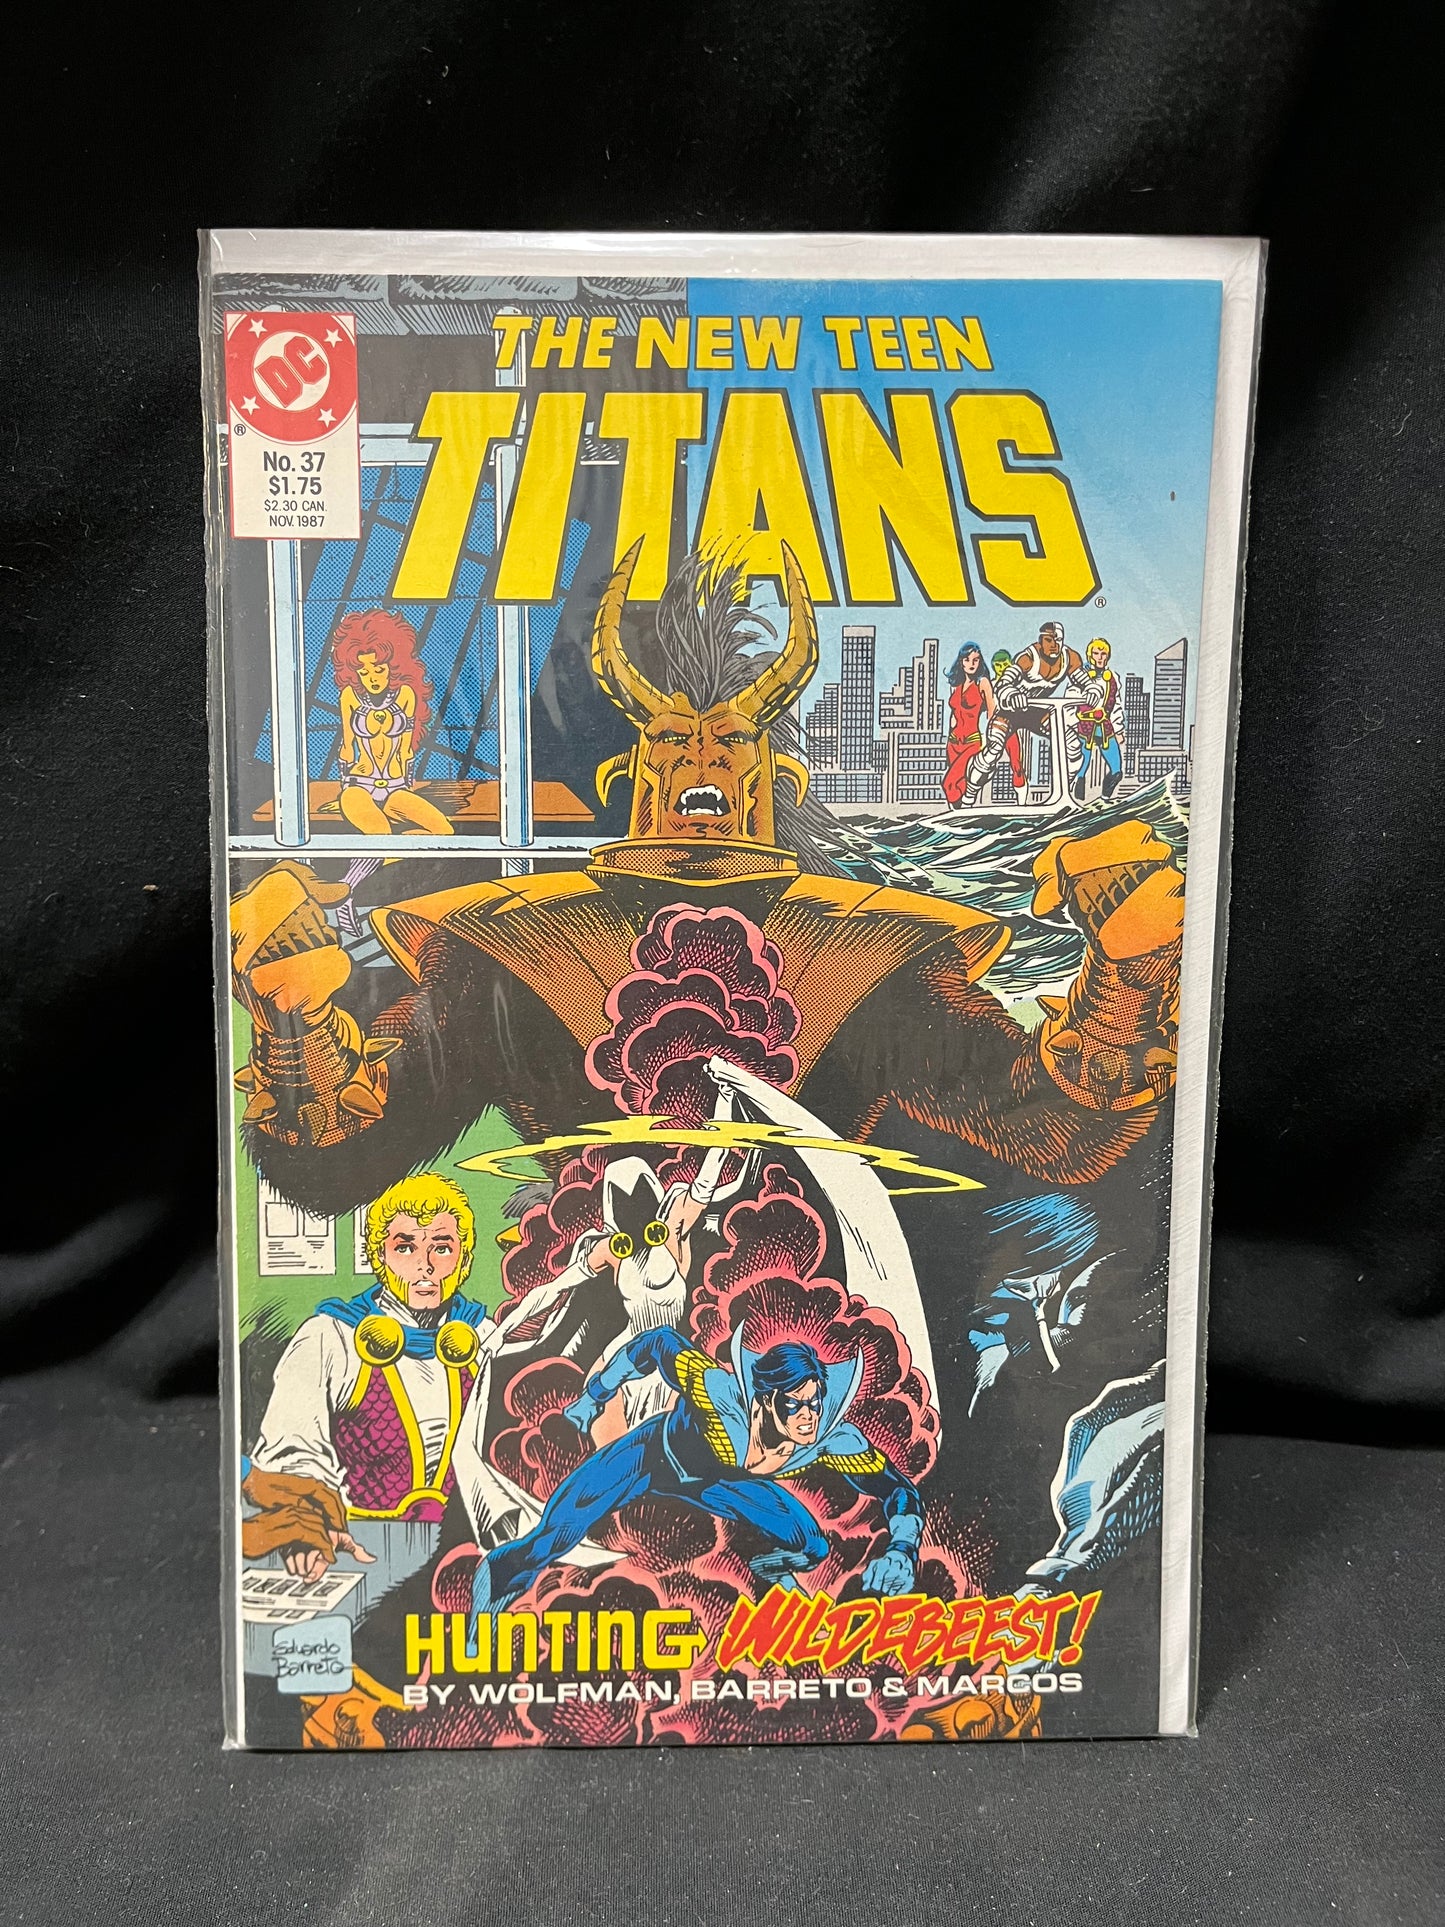 The New Teen Titans Comic Book No. 37 - Hunting WIldebeest!